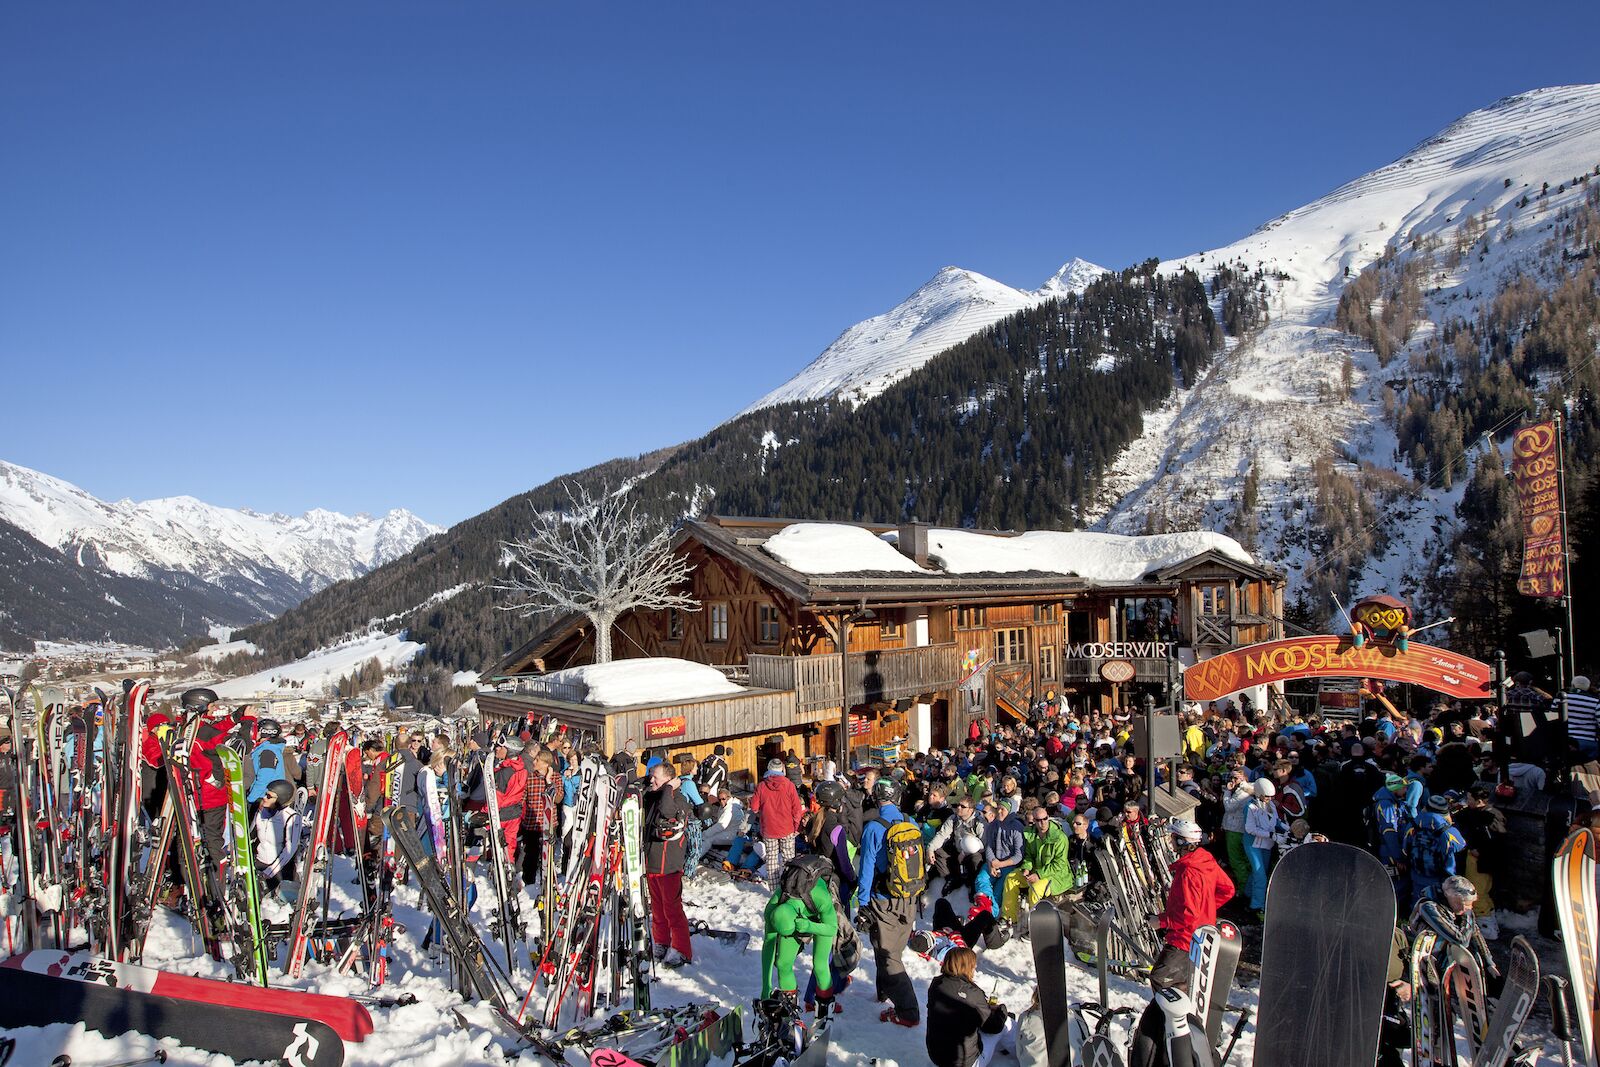 Outside at the Mooserwirt in St. Anton, Austria is a huge party